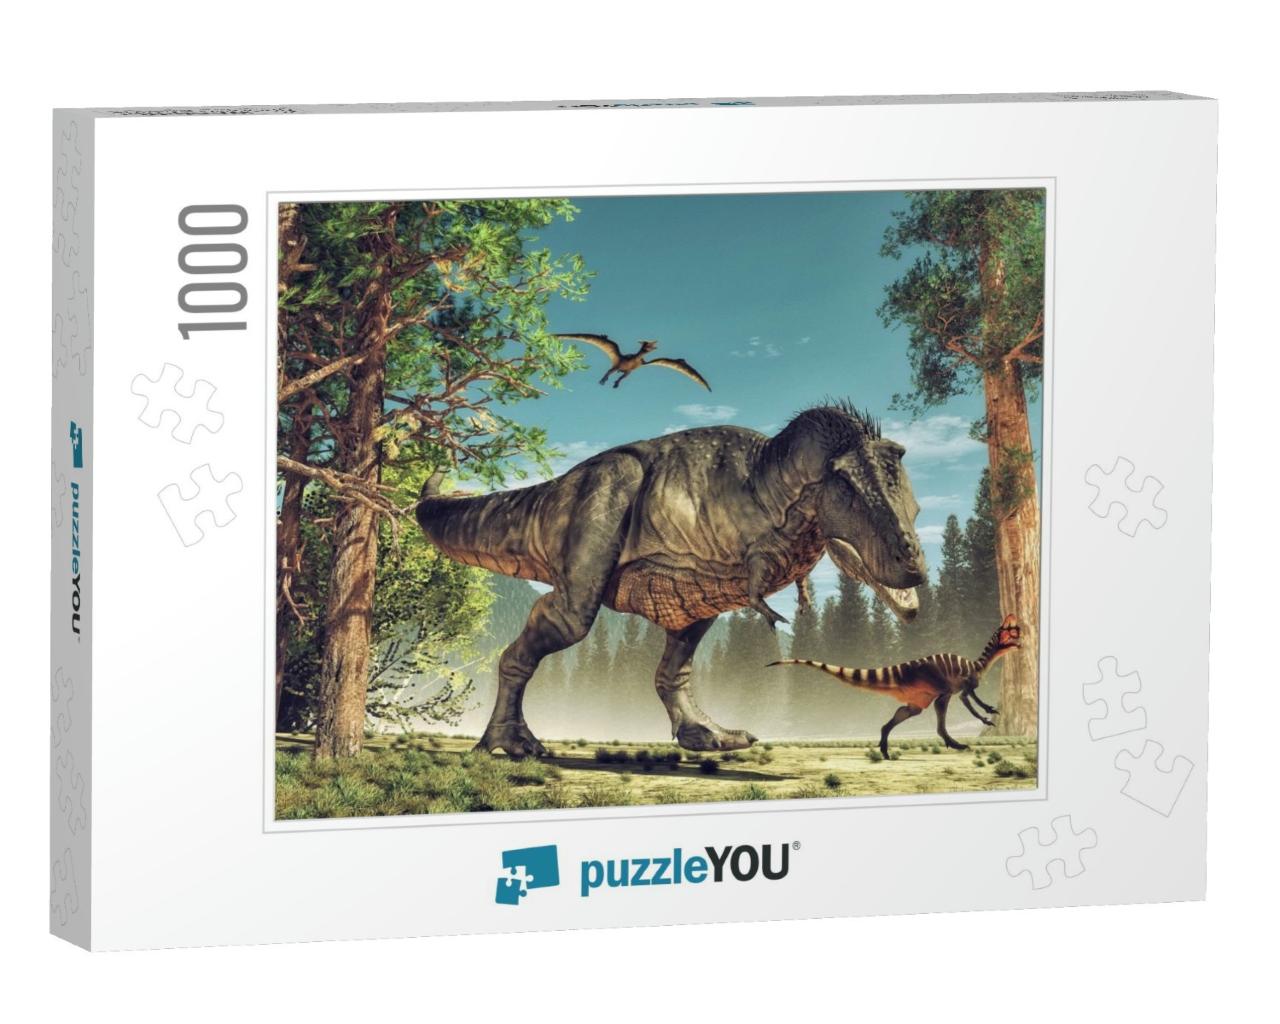 3D Render Dinosaur. This is a 3D Render Illustration... Jigsaw Puzzle with 1000 pieces